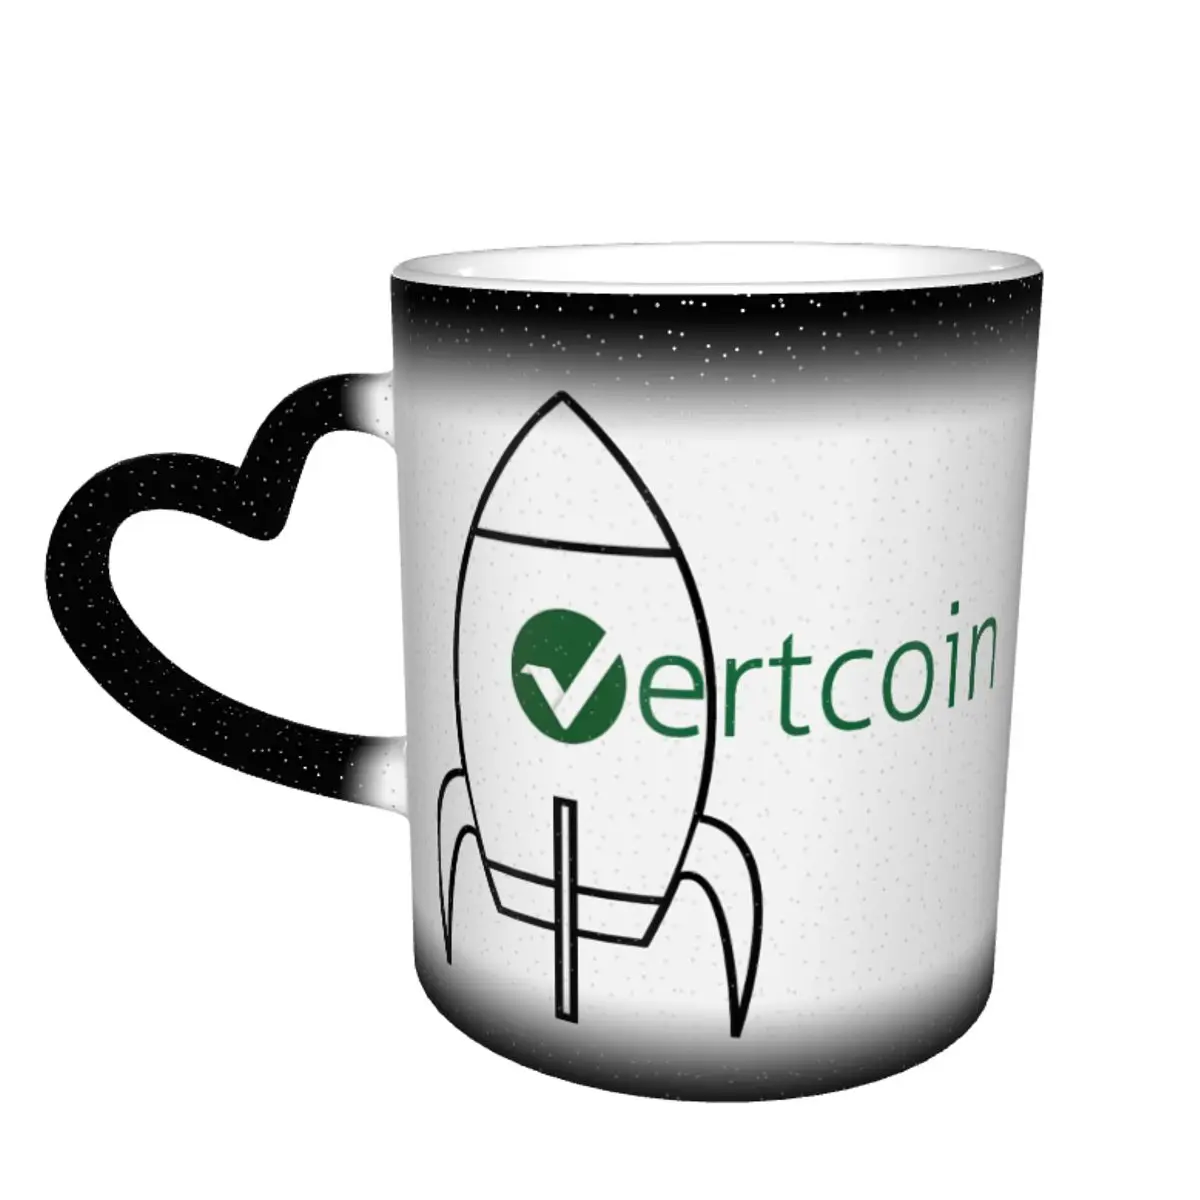 

Vertcoin 2 Color Changing Mug in the Sky Graphic Ceramic Heat-sensitive Cup Funny Novelty Hodl Crypto Beer mugs